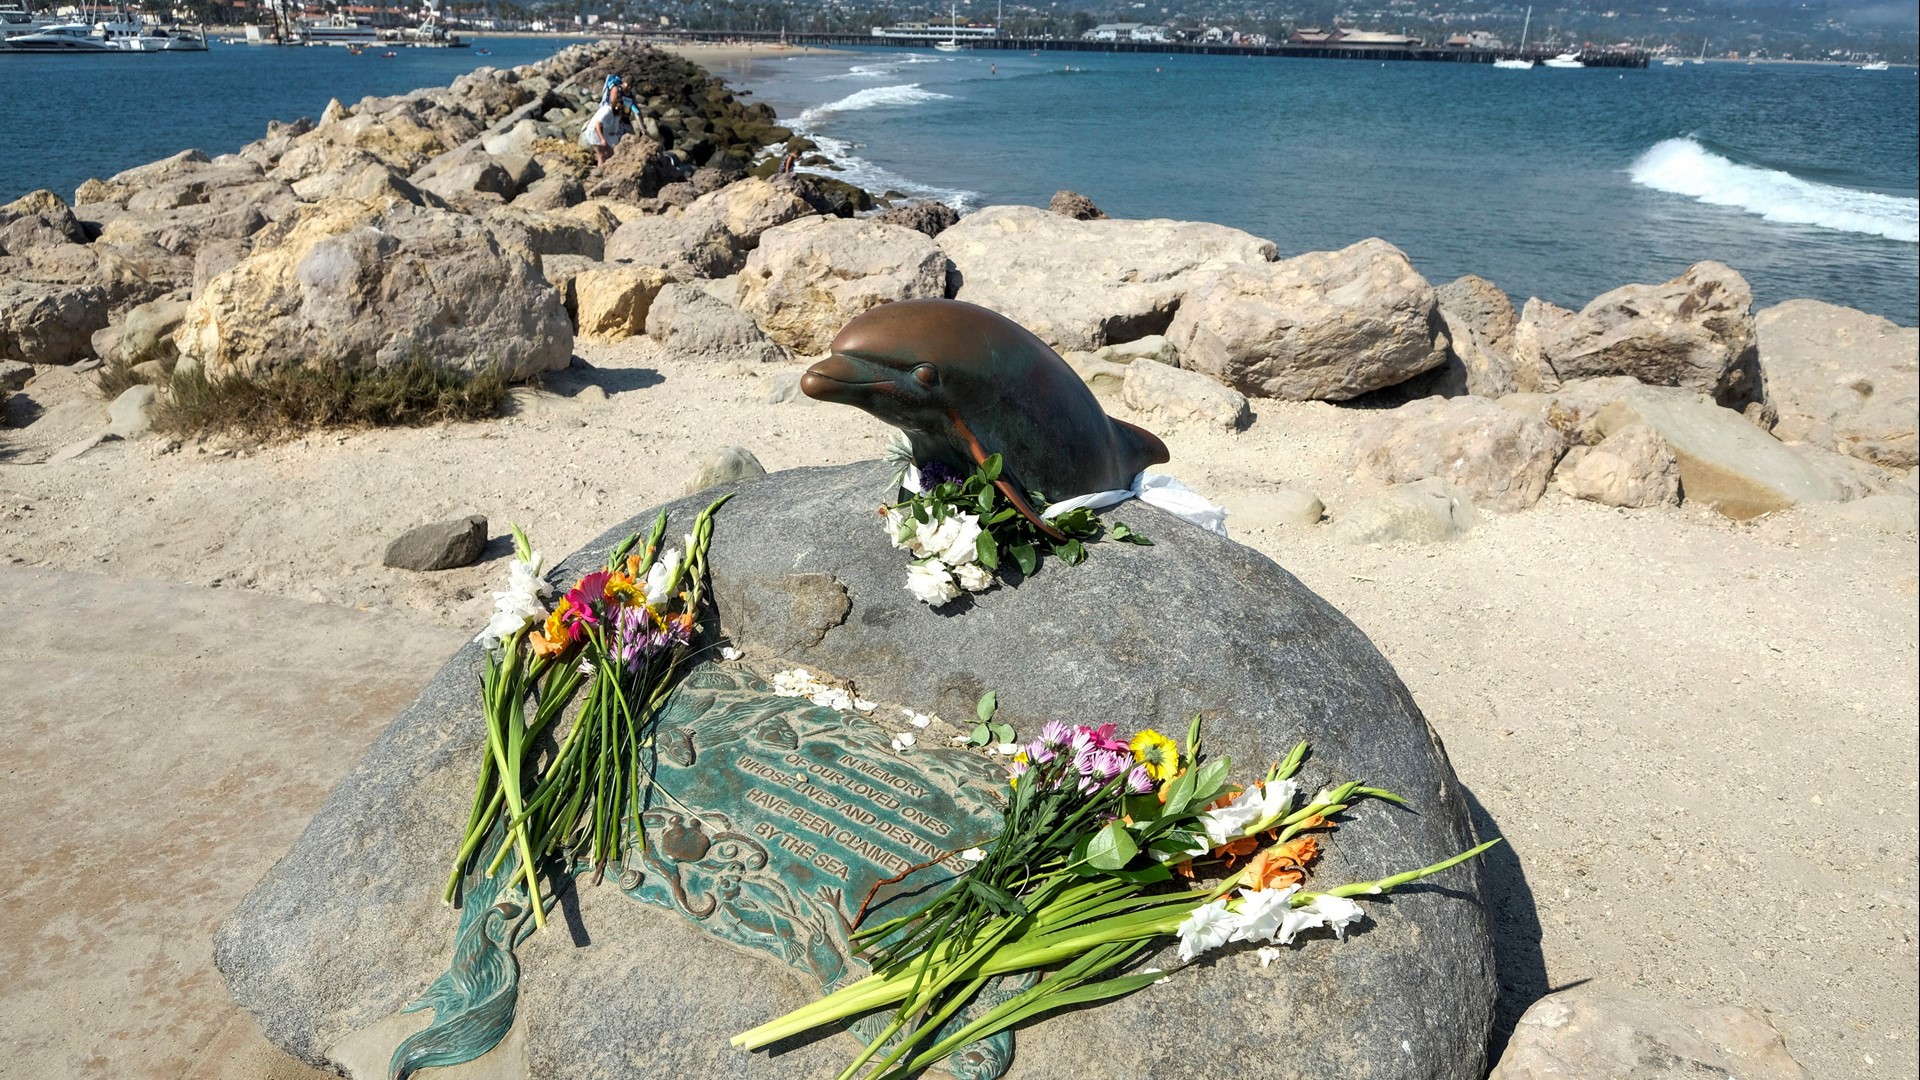 When the makeshift memorial first started to grow, the 34 victims of the Conception boat fire were still considered missing. Since then, the Coast Guard said they have shifted their efforts from a search and rescue to a search and recovery. All throughout the day Tuesday people stopped by to leave flowers.